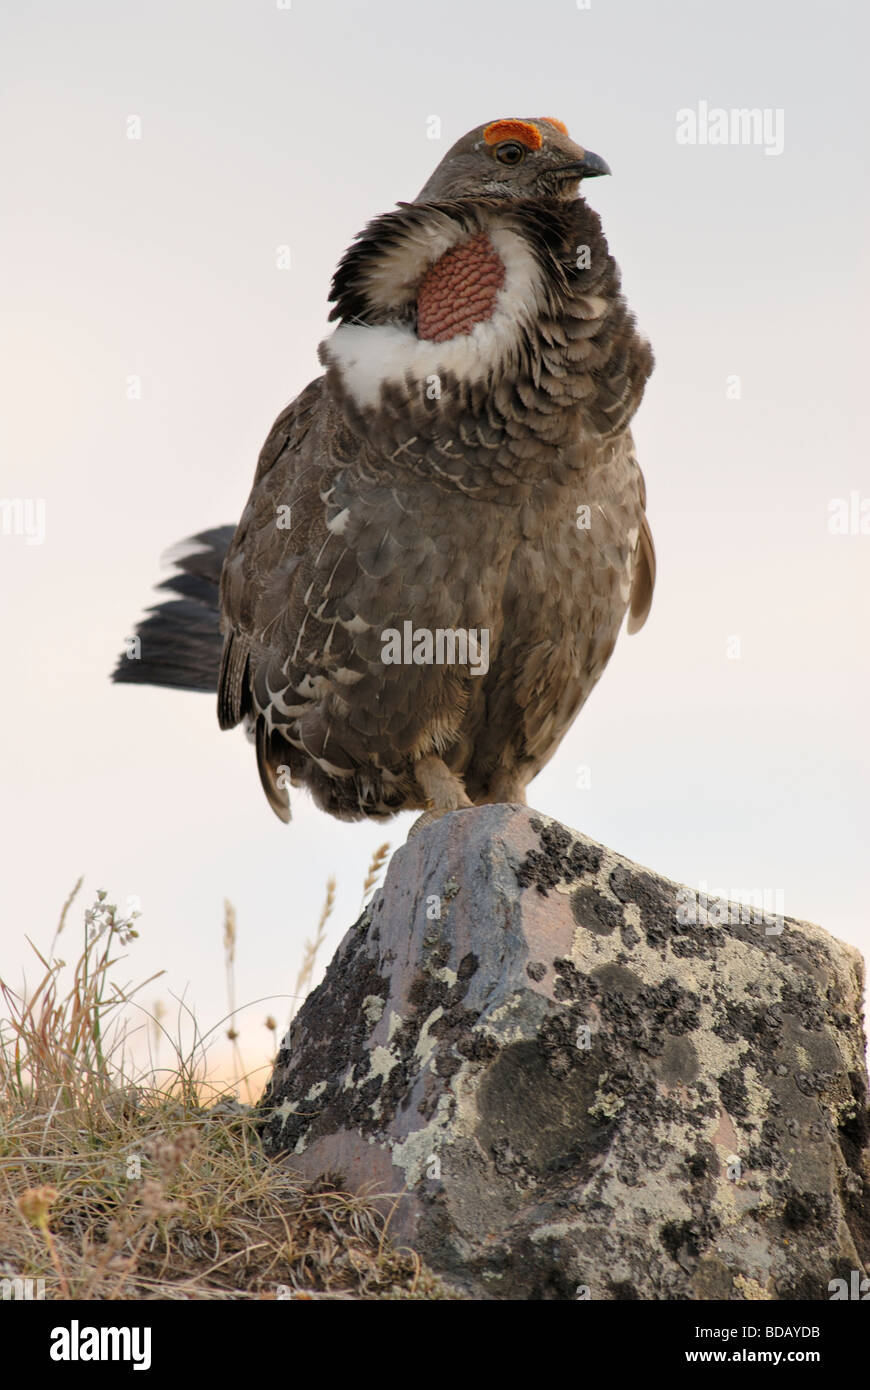 Stock photo of a blue grouse perched on a rock in breeding plumage, Yellowstone National Park, Wyoming. Stock Photo